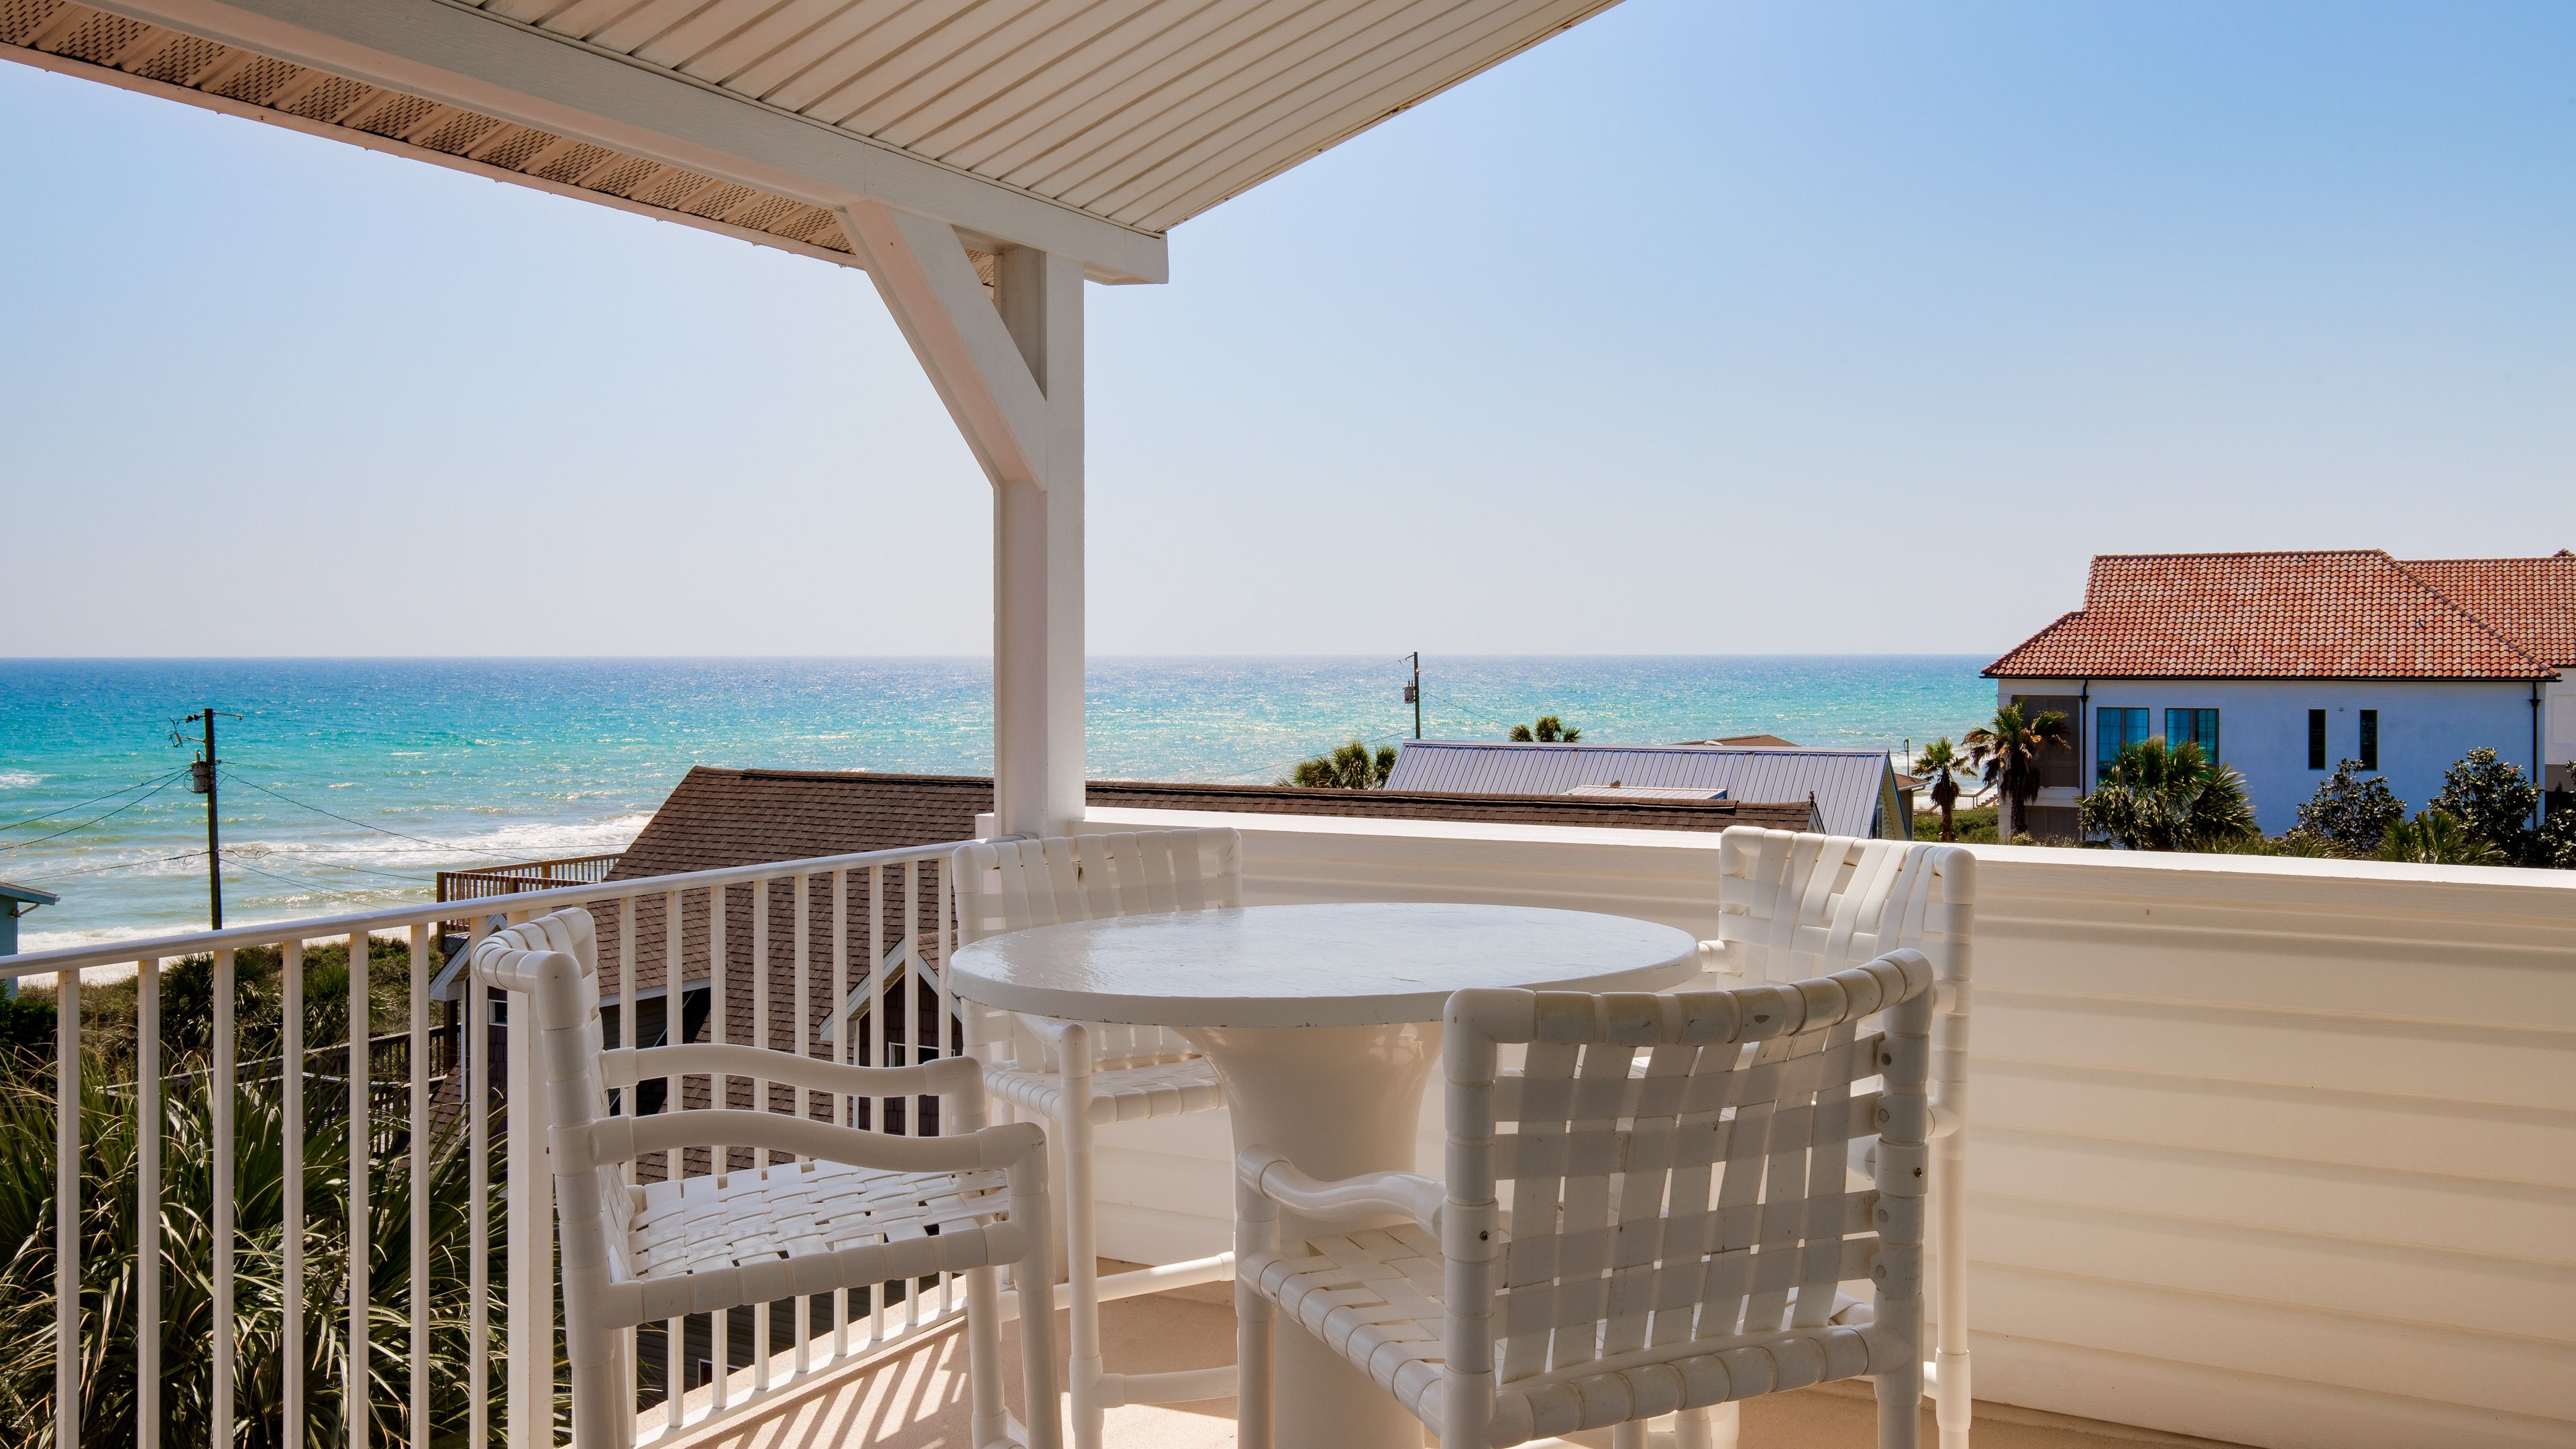 Endless gulf views from the spacious top deck!